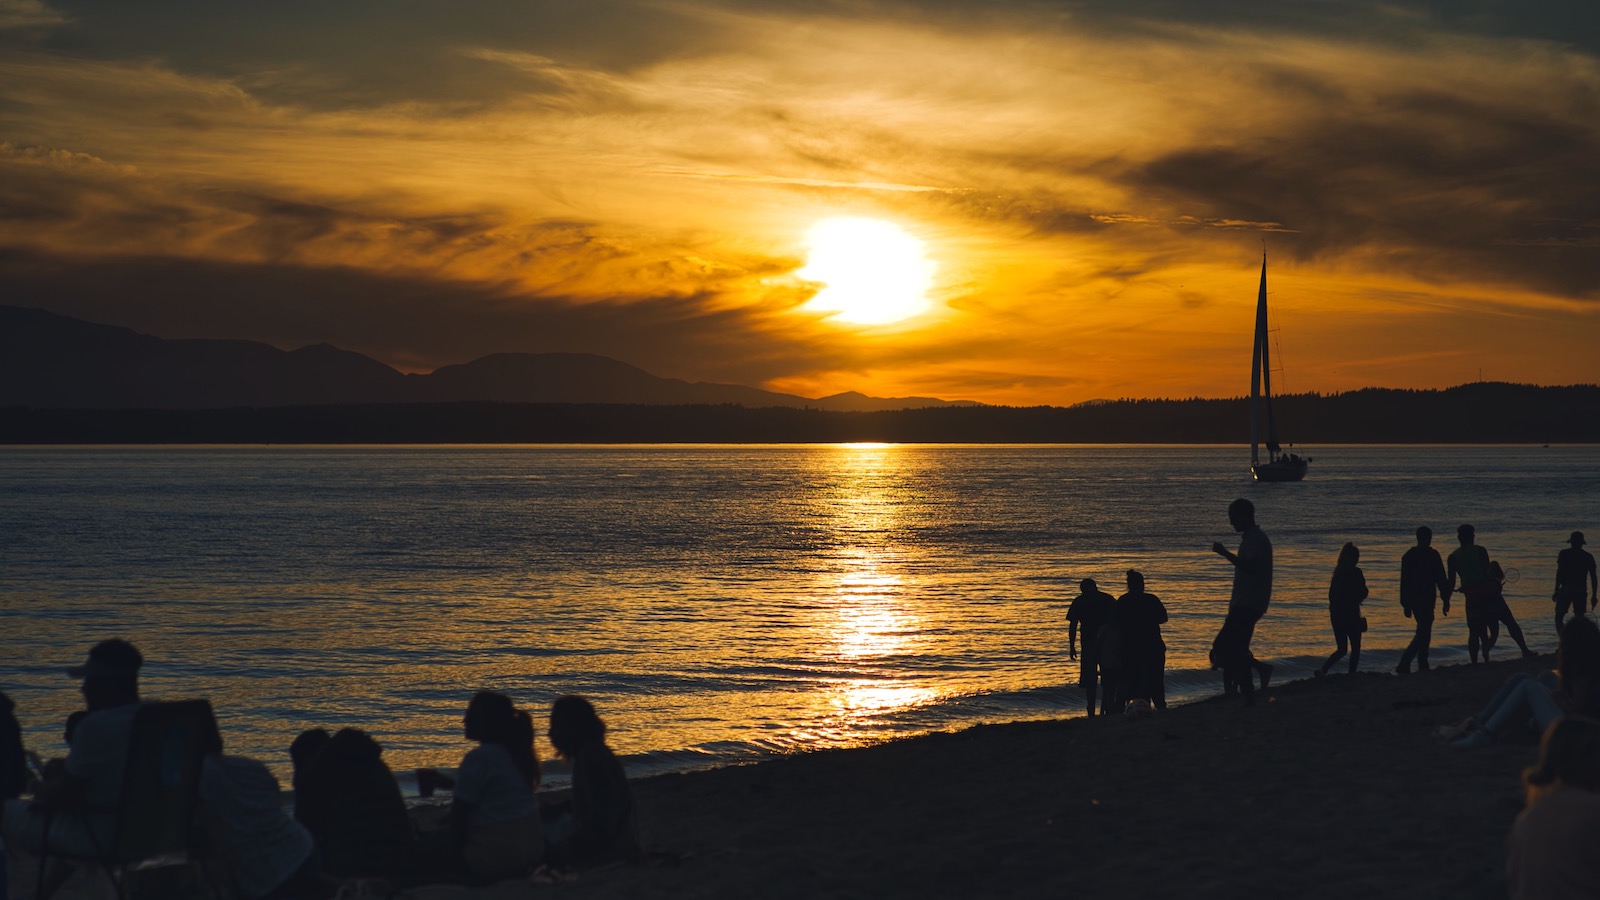 People on a beach in Seattle are seen in silhouette as the sun sets over the mountains in the background.